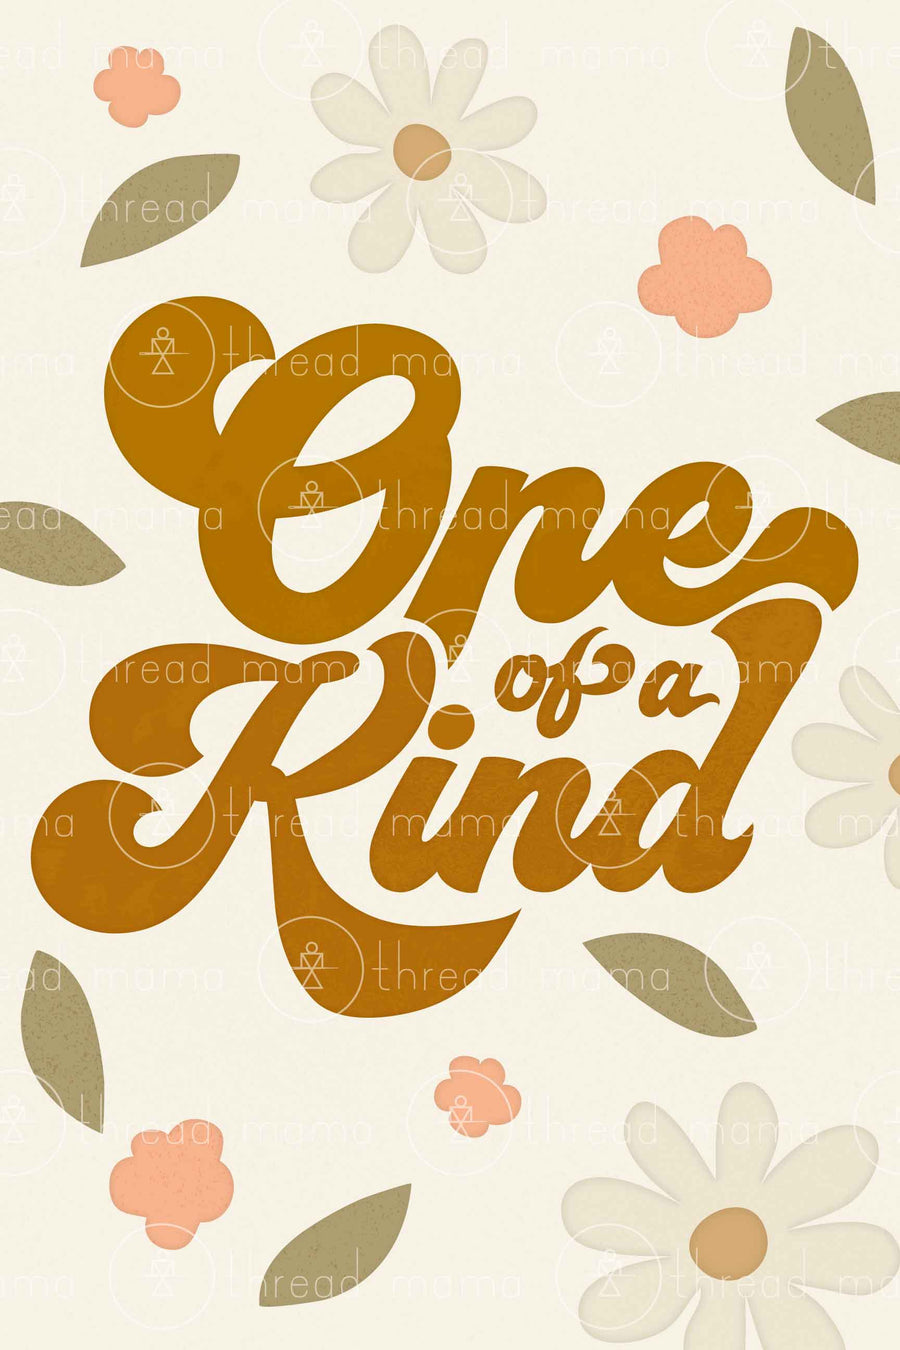 One of a Kind (Printable Poster)